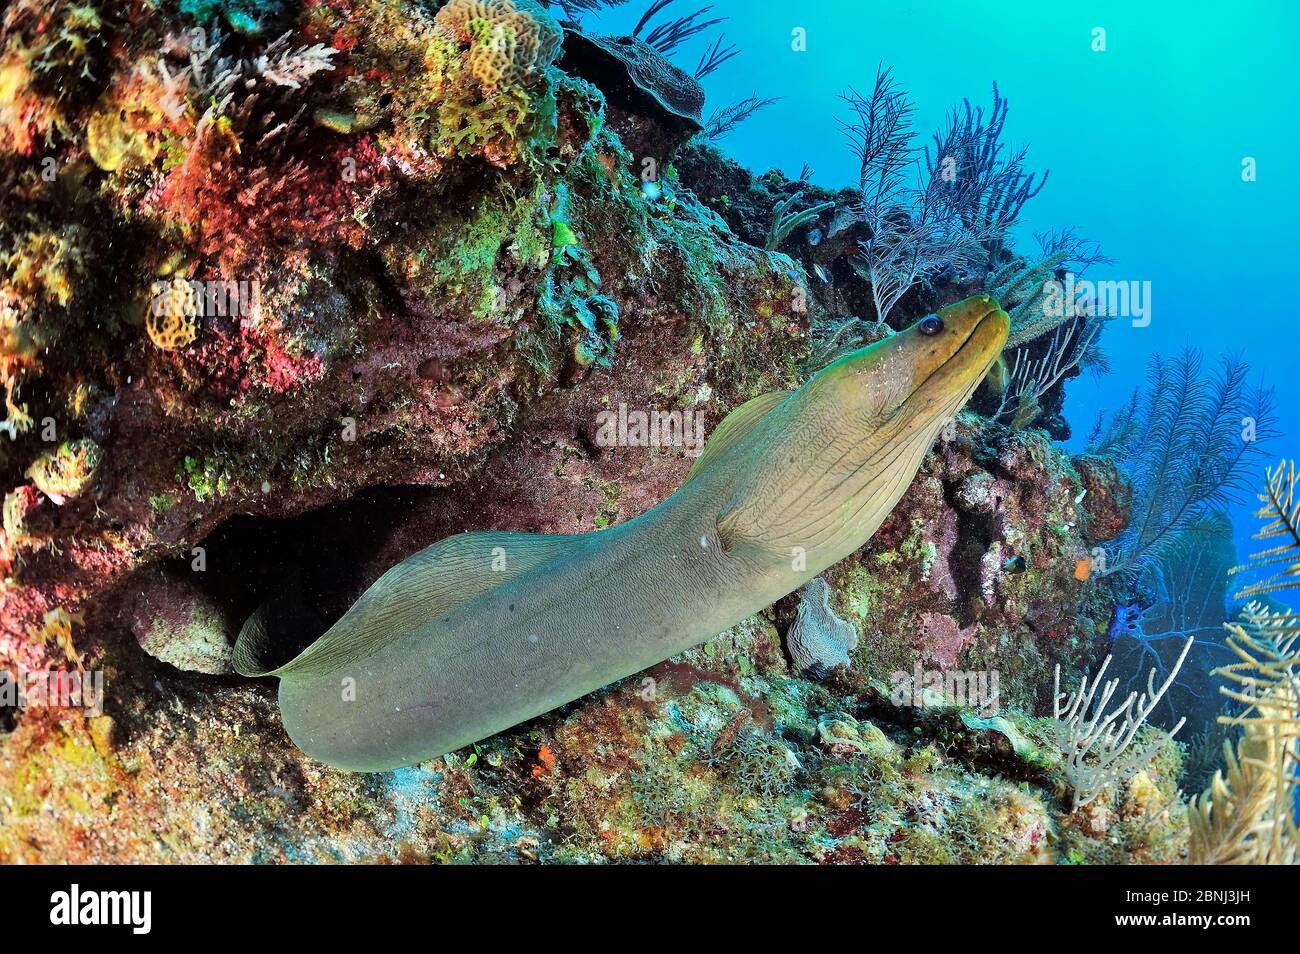 Green moray (Gymnothorax funebris) out of its hole or burrow, Belize, Caribbean Stock Photo